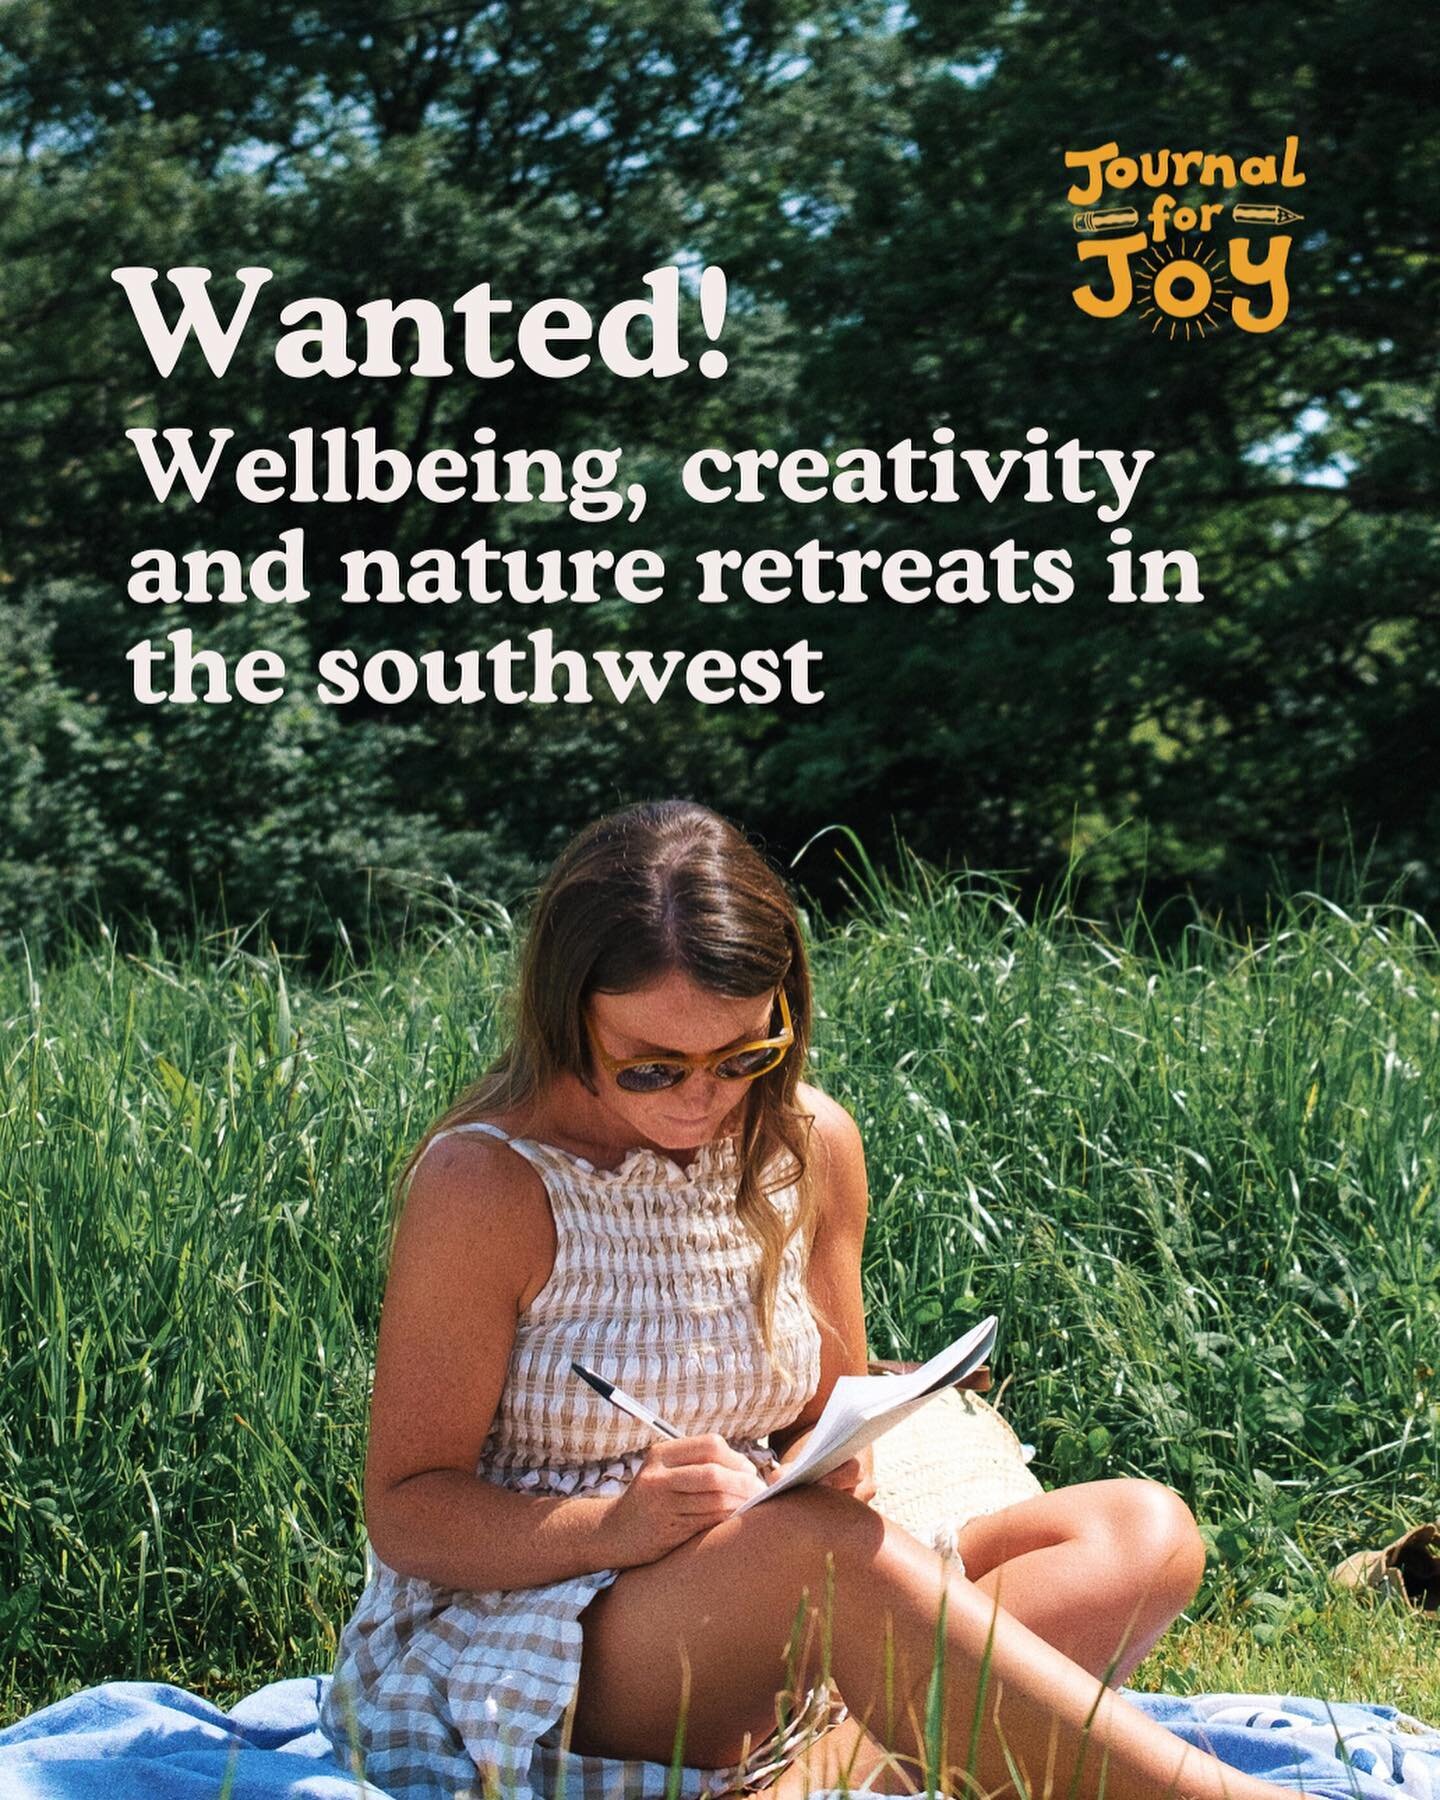 I&rsquo;m on the lookout for lovely retreats in the southwest where I can host joyful creative journaling workshops this summer 🙂✍️🌿✨Are you running an event with a focus on wellbeing, creativity or nature? And if so, are you seeking a smiley facil